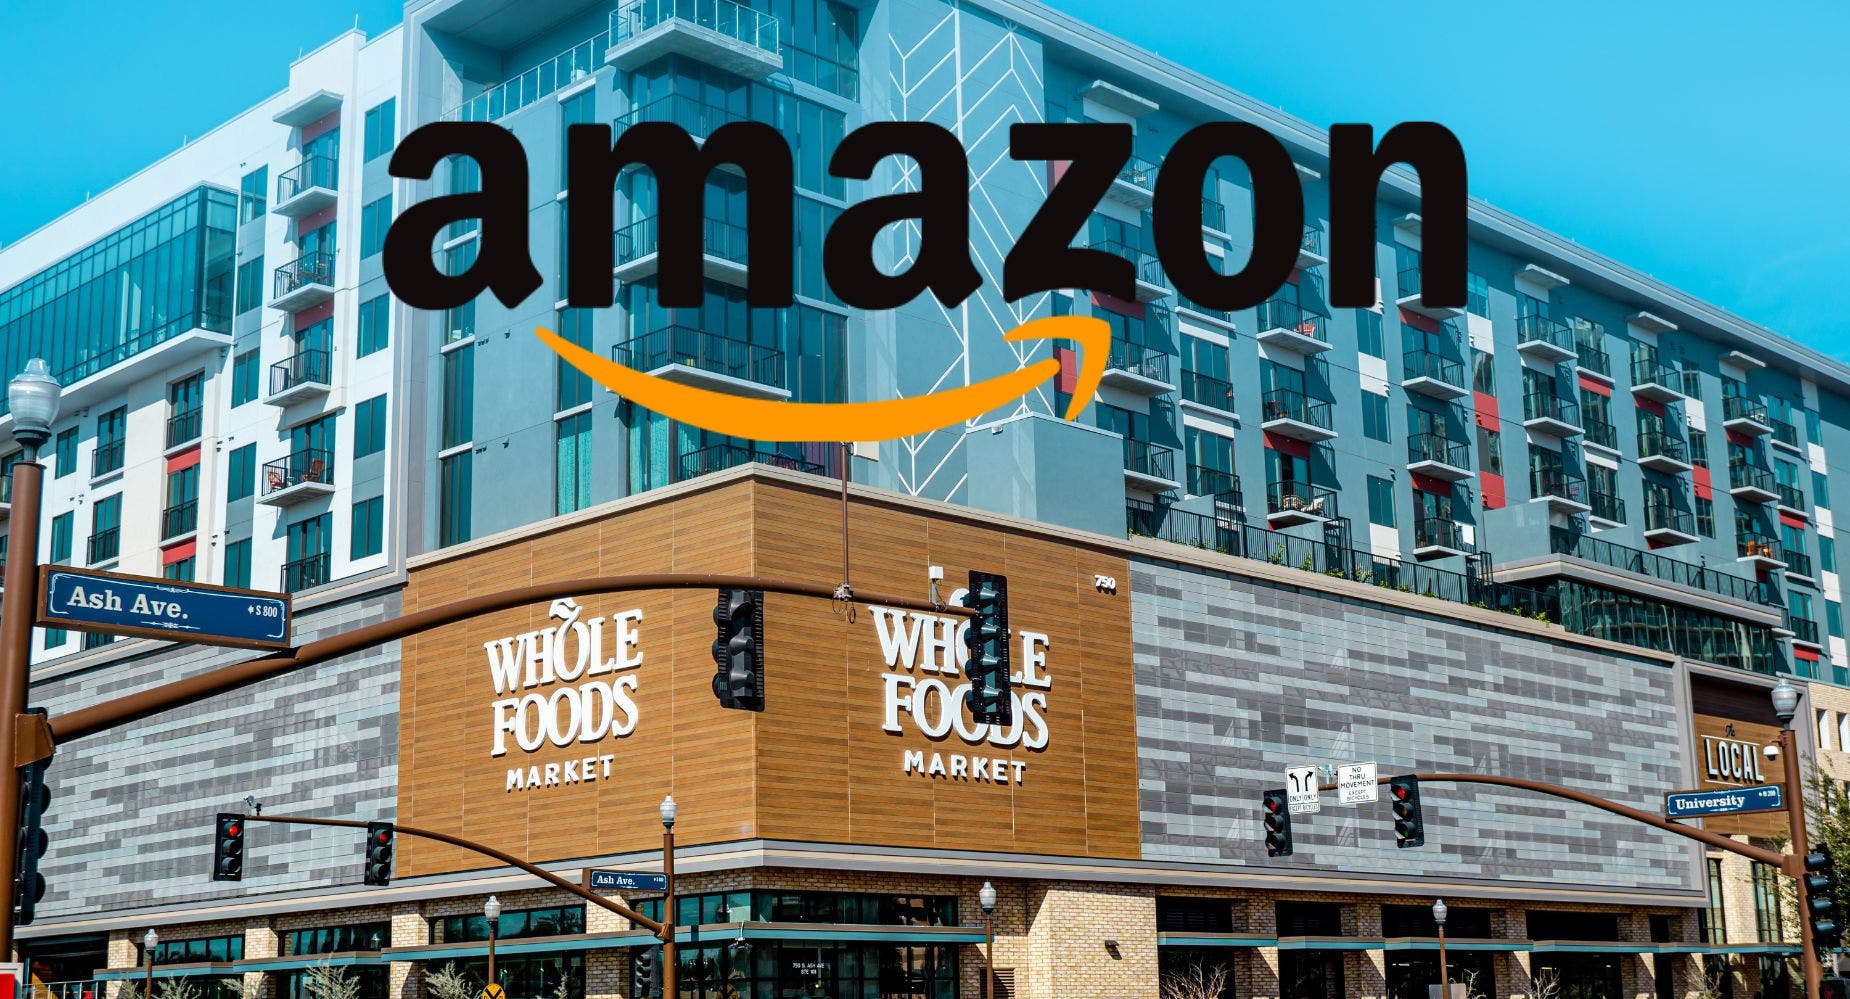 If You Invested $1000 in Amazon Stock When It Acquired Whole Foods, Here's How Much You'd Have Now